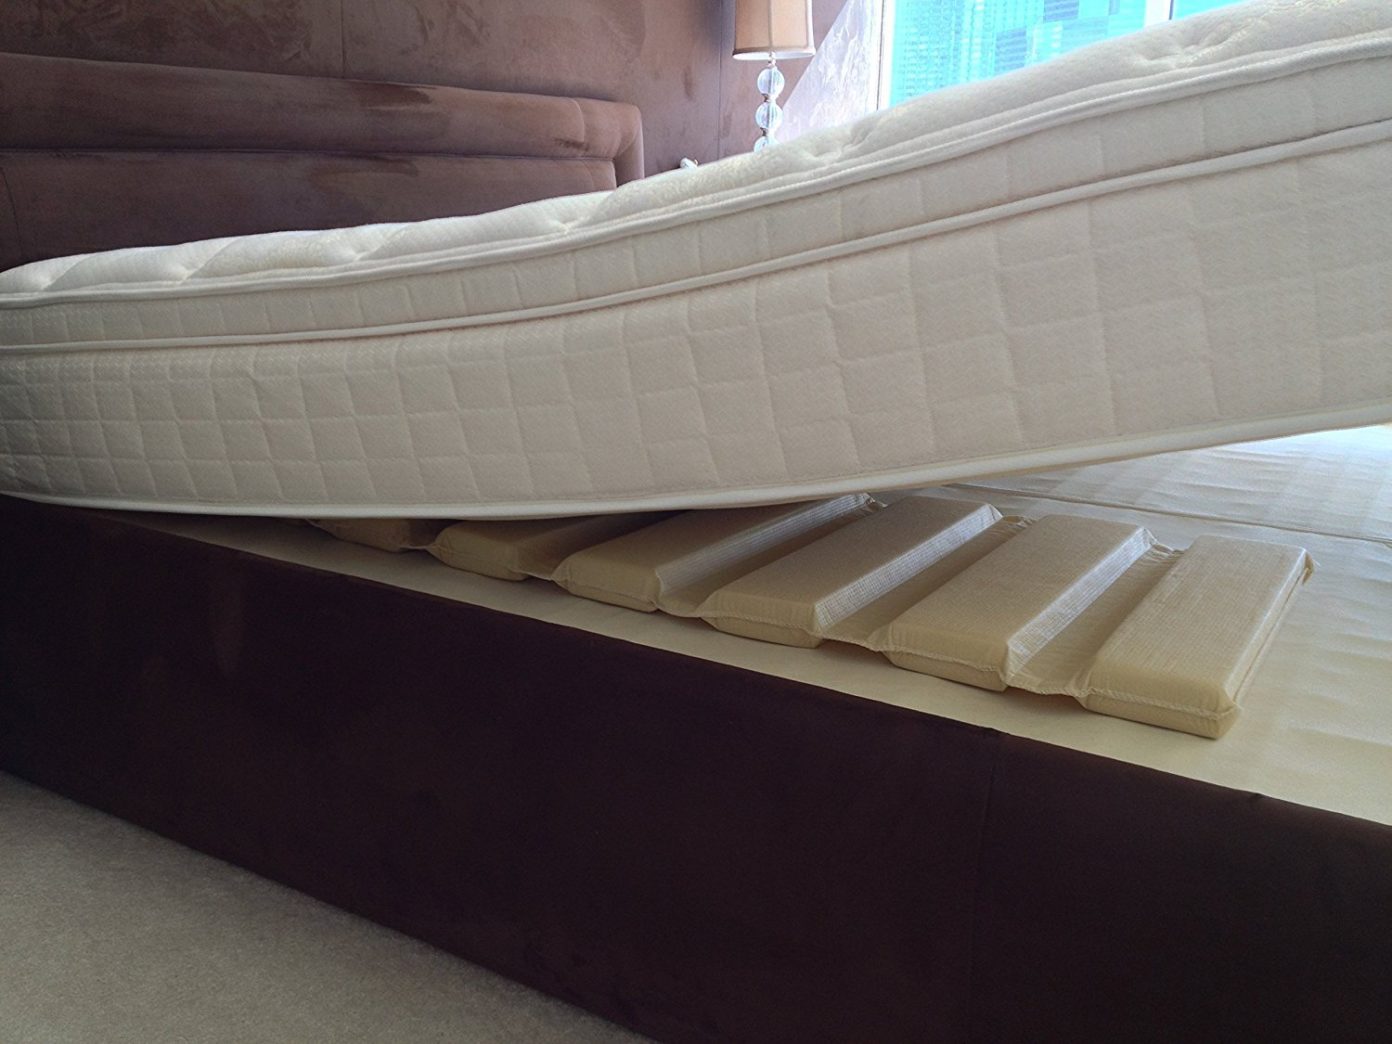 bed board for under mattress